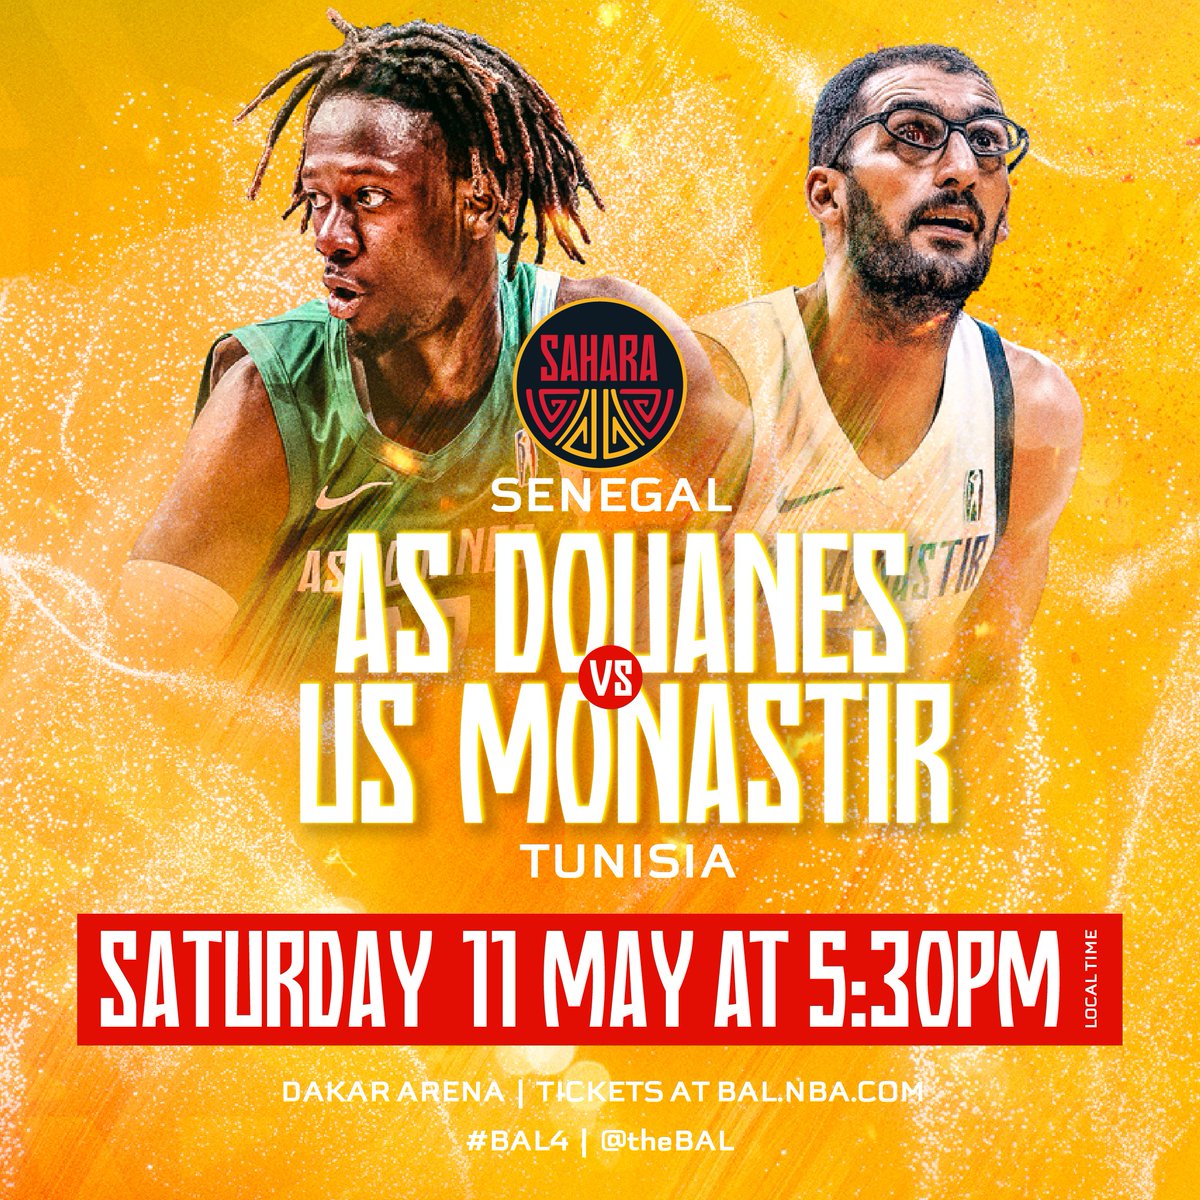 Saturday BAL Games in Dakar! #BAL4 ⏰14:30: Rivers Hoopers 🇳🇬 v APR 🇷🇼 ⏰17:30: AS Douanes 🇸🇳 vs US Monastir 🇹🇳 🎫 Get your tickets now: BAL.NBA.com 👀Watch the games live on: 📺youtube.com/@thebal 📲BAL.NBA.com / NBA App 💻bal.nba.com